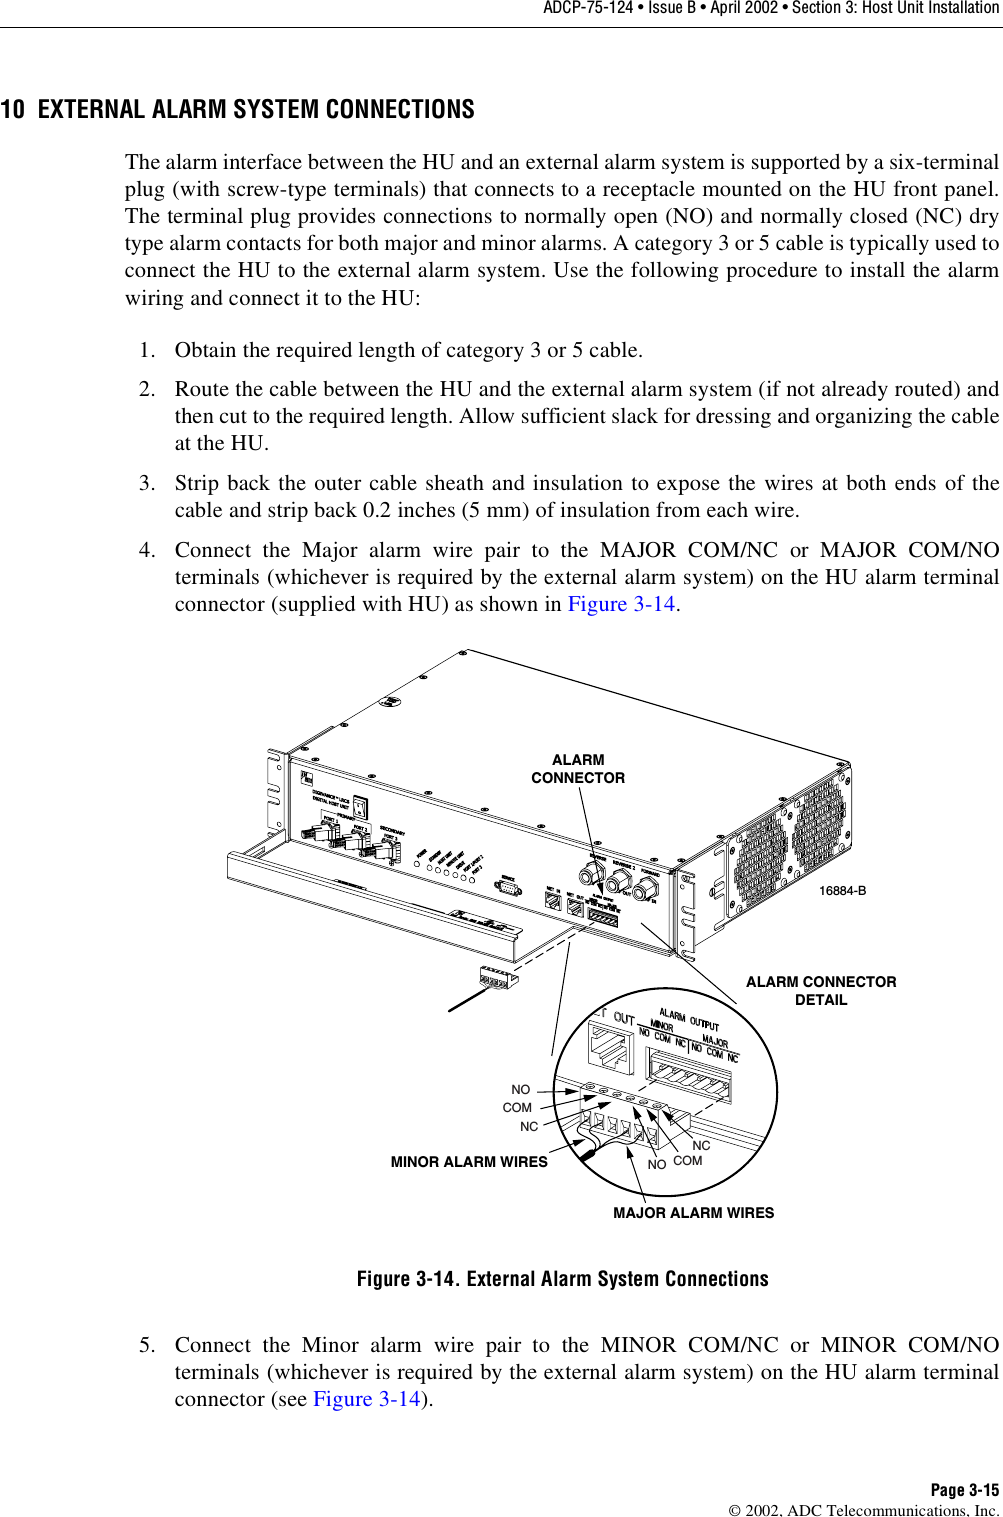 ADCP-75-124 • Issue B • April 2002 • Section 3: Host Unit InstallationPage 3-15©2002, ADC Telecommunications, Inc.10 EXTERNAL ALARM SYSTEM CONNECTIONSThe alarm interface between the HU and an external alarm system is supported by asix-terminalplug (with screw-type terminals) that connects to areceptacle mounted on the HU front panel.The terminal plug provides connections to normally open (NO) and normally closed (NC) drytype alarm contacts for both major and minor alarms. Acategory 3or 5cable is typically used toconnect the HU to the external alarm system. Use the following procedure to install the alarmwiring and connect it to the HU:1. Obtain the required length of category 3or 5cable.2. Route the cable between the HU and the external alarm system (if not already routed) andthen cut to the required length. Allow sufficient slack for dressing and organizing the cableat the HU.3. Strip back the outer cable sheath and insulation to expose the wires at both ends of thecable and strip back 0.2 inches (5 mm) of insulation from each wire.4. Connect the Major alarm wire pair to the MAJOR COM/NC or MAJOR COM/NOterminals (whichever is required by the external alarm system) on the HU alarm terminalconnector (supplied with HU) as shown in Figure 3-14.Figure 3-14. External Alarm System Connections5. Connect the Minor alarm wire pair to the MINOR COM/NC or MINOR COM/NOterminals (whichever is required by the external alarm system) on the HU alarm terminalconnector (see Figure 3-14).16884-BALARMCONNECTORMAJOR ALARM WIRESMINOR ALARM WIRESALARM CONNECTORDETAILNOCOMNCNO COMNC